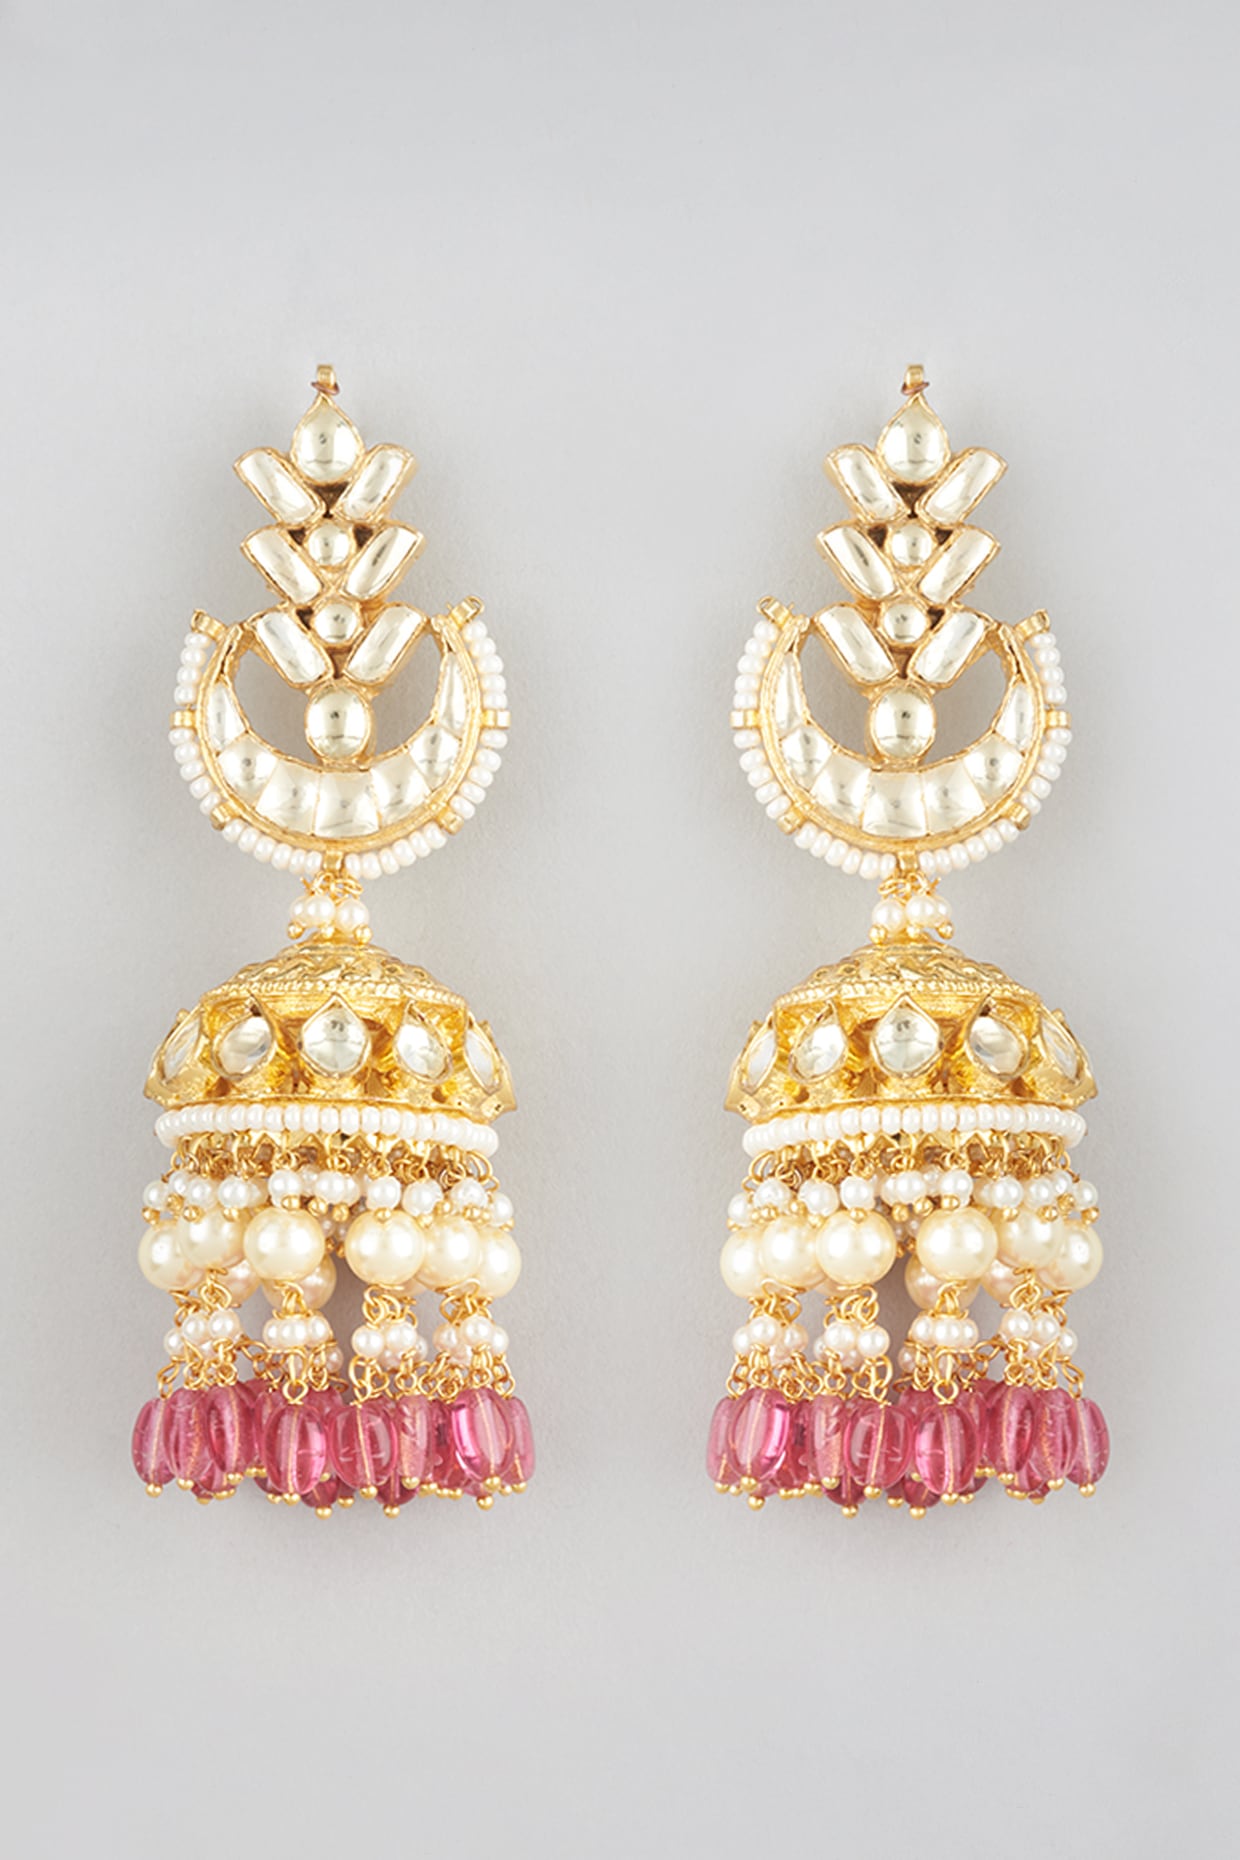 Aggregate more than 125 jhumka traditional earrings latest